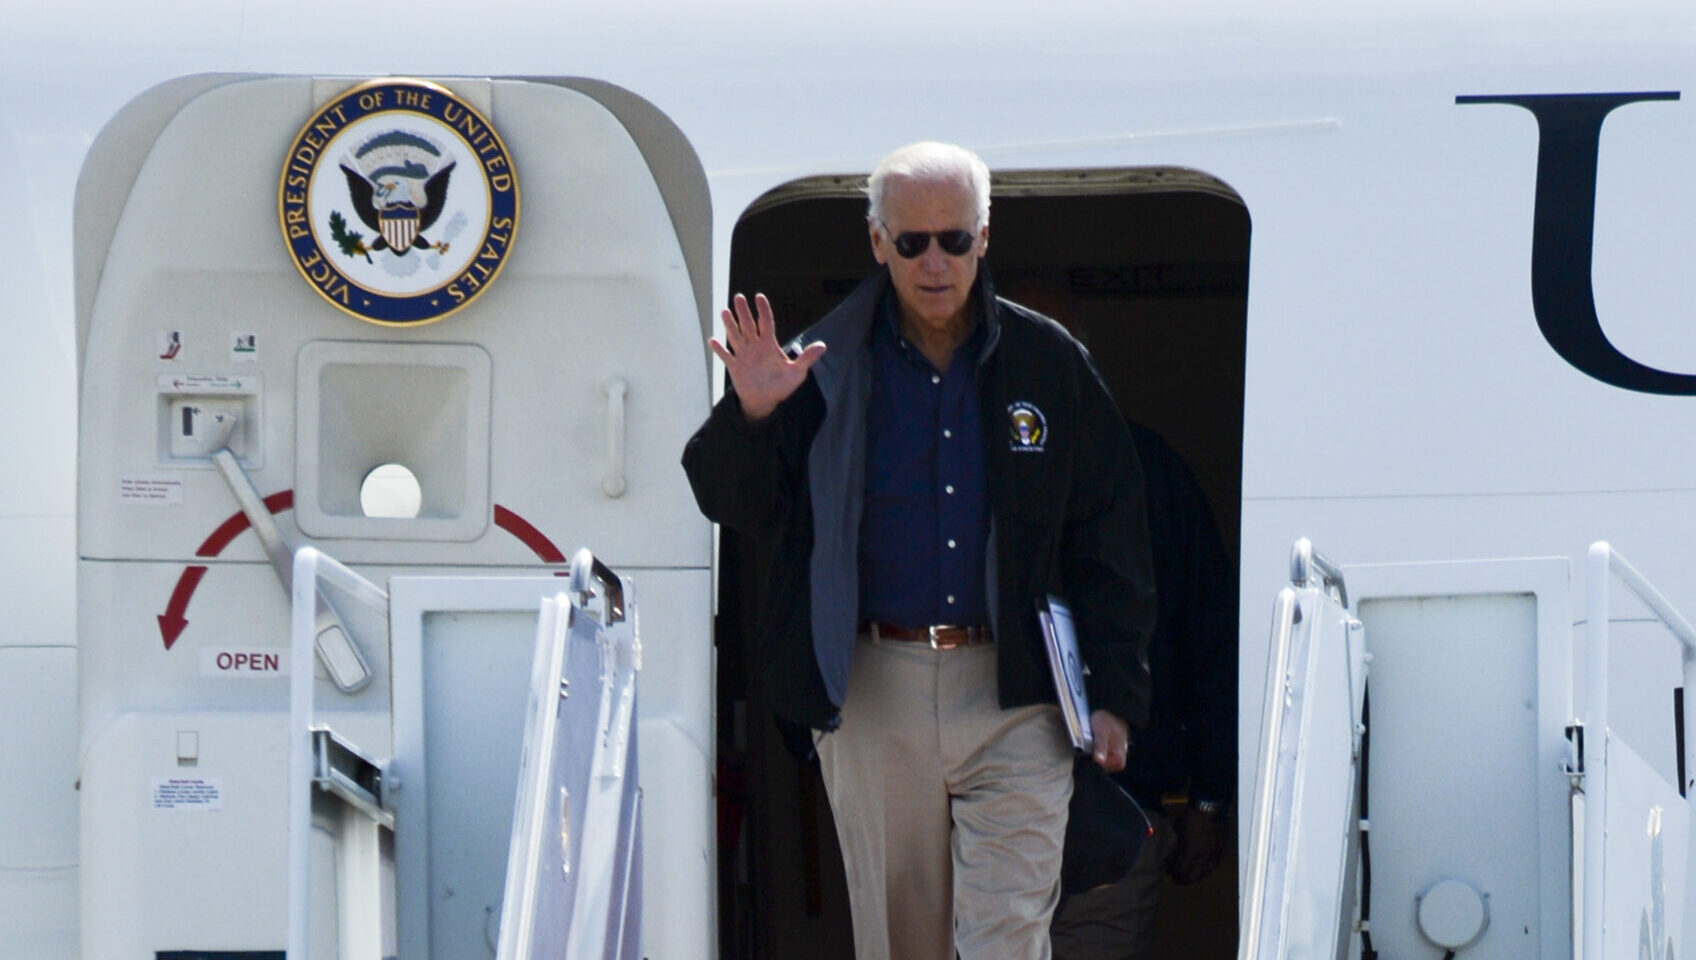 Oversight Committee requests Hunter Biden’s Air Force Two flight logs for family business purposes.